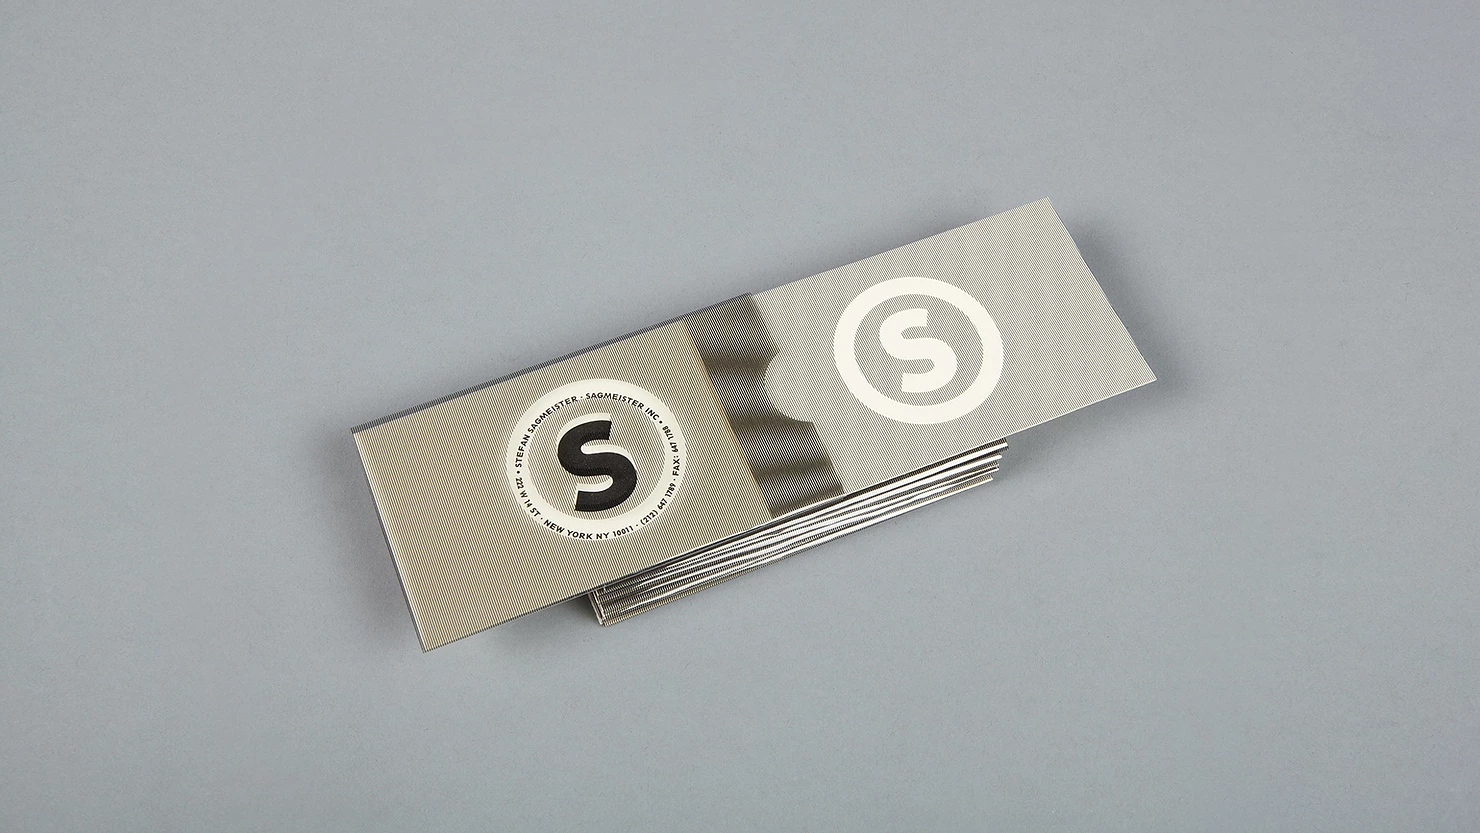 Sagmeister's business cards. Text is masked until the card is removed from the holder